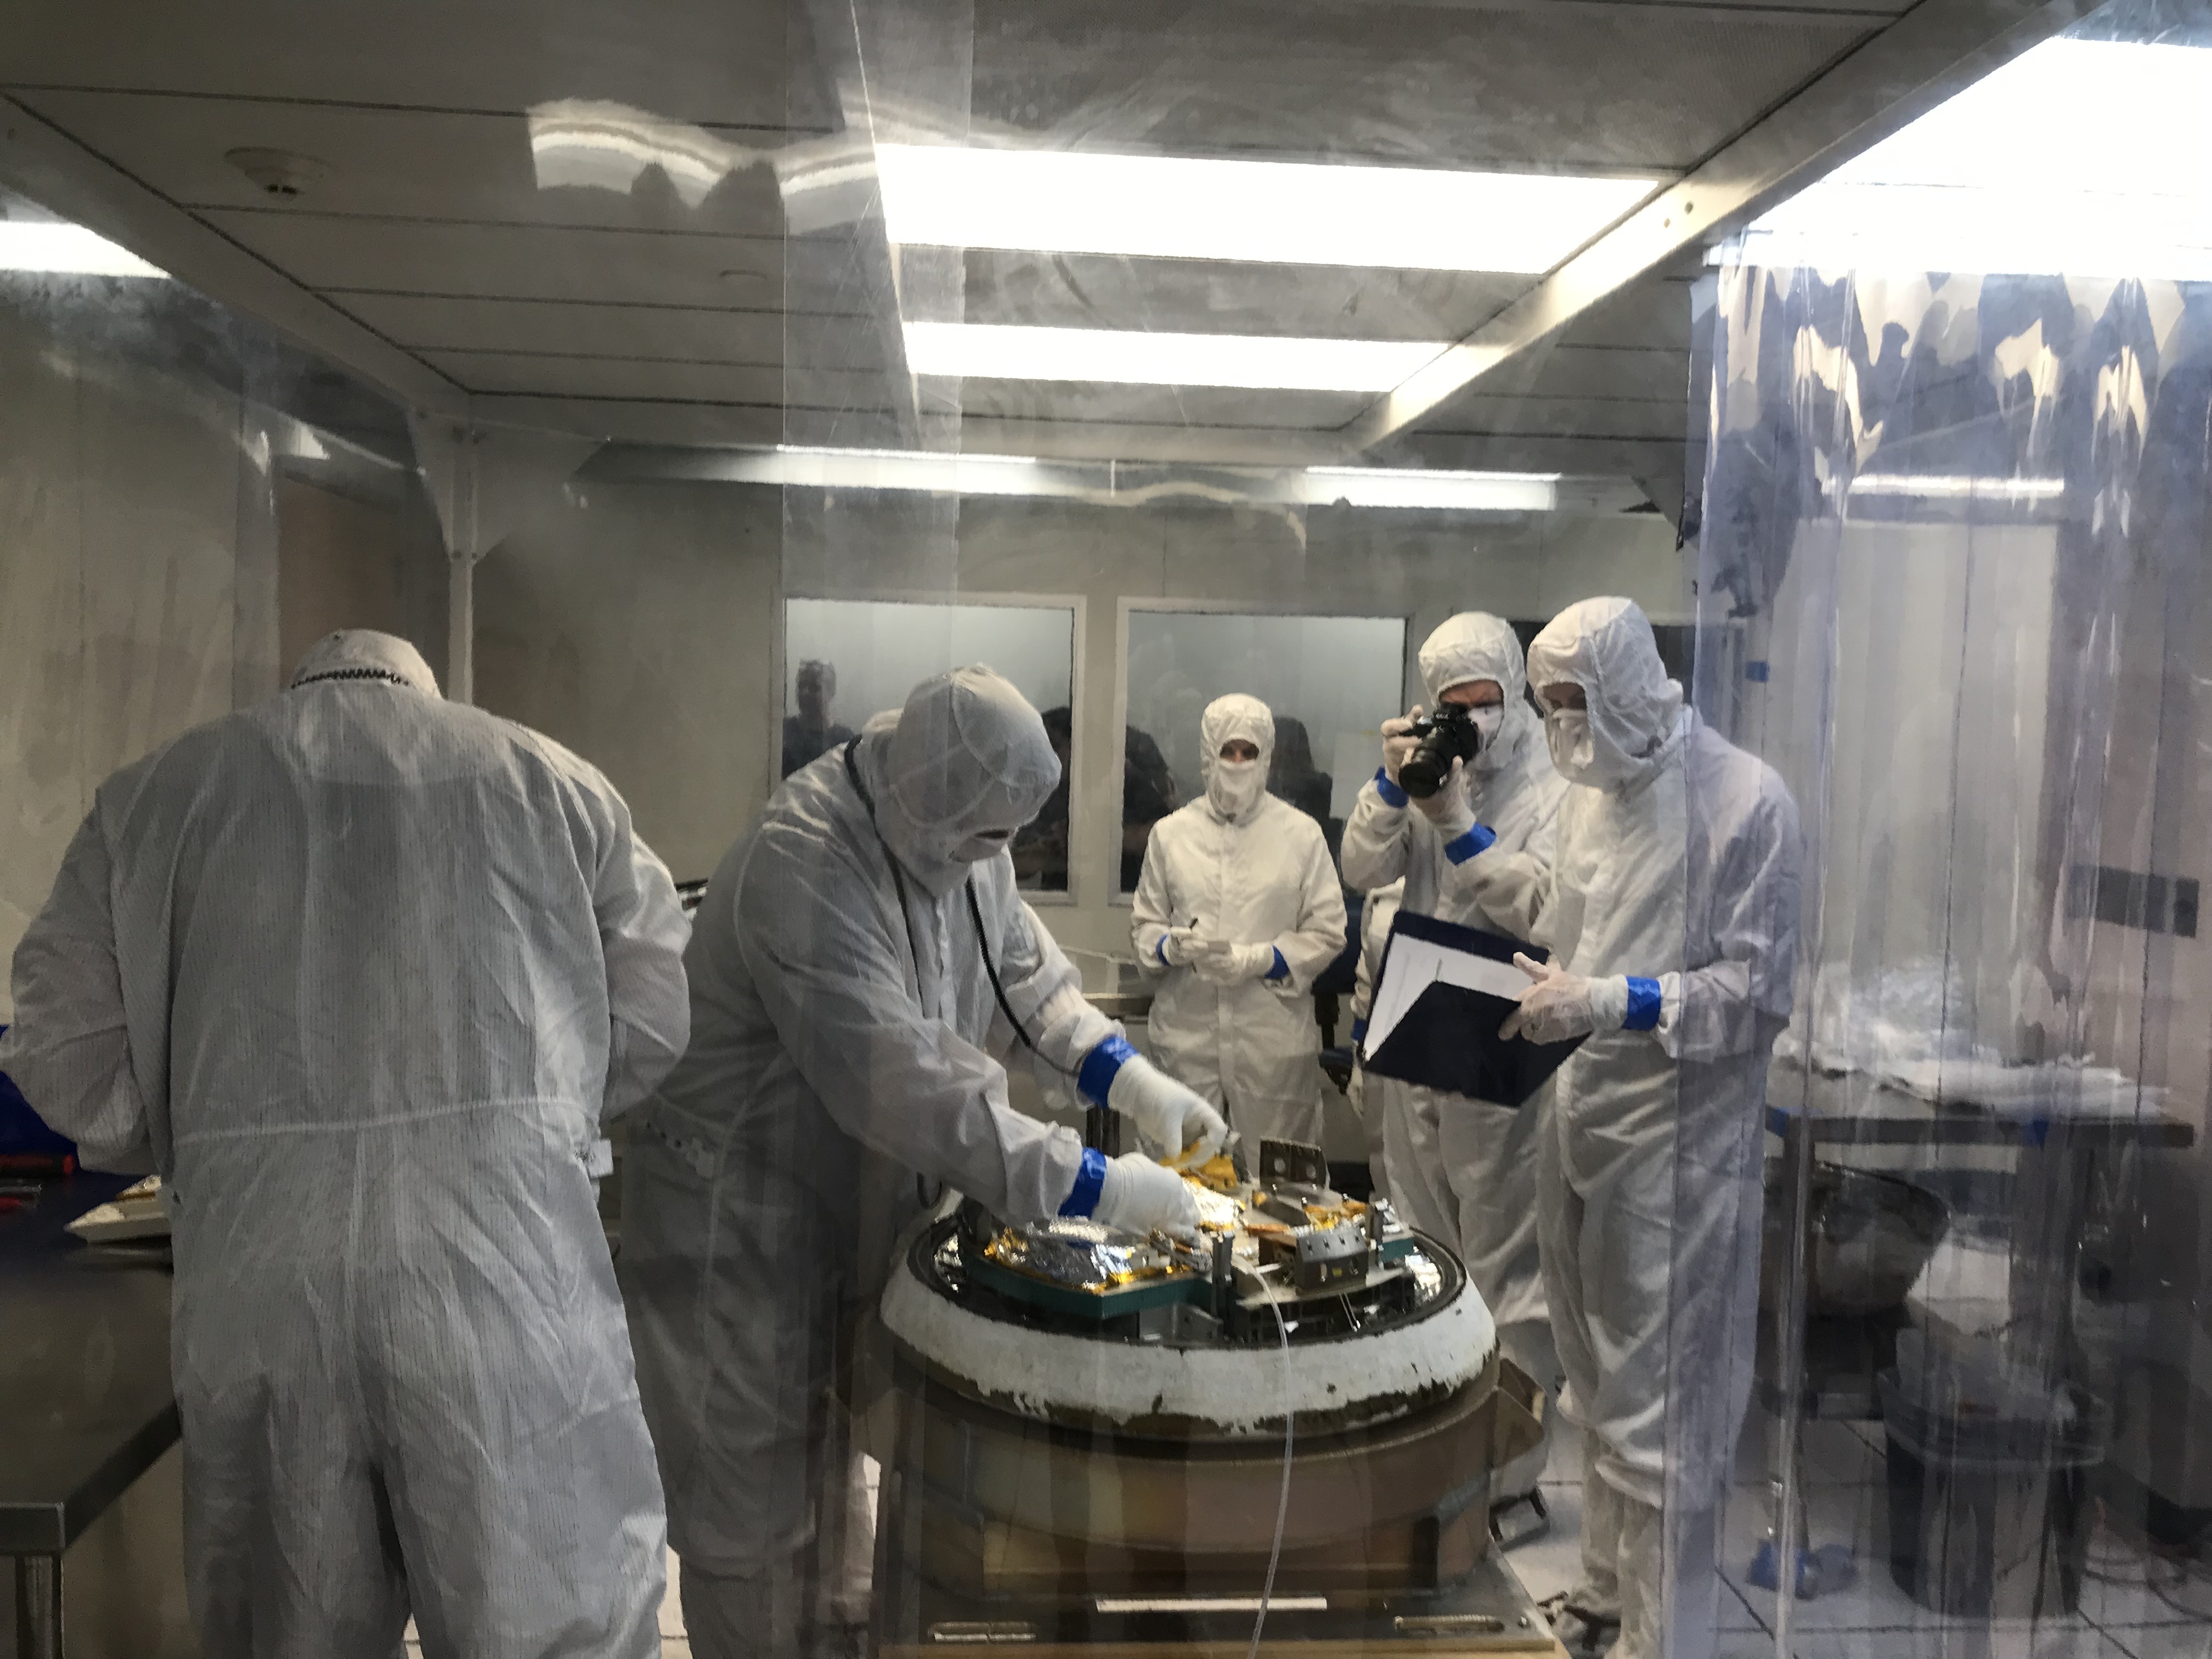 Practice a clean room session at Lockheed Martin's facility near Denver with specialists partially disassembling the OSIRIS-REx return capsule.